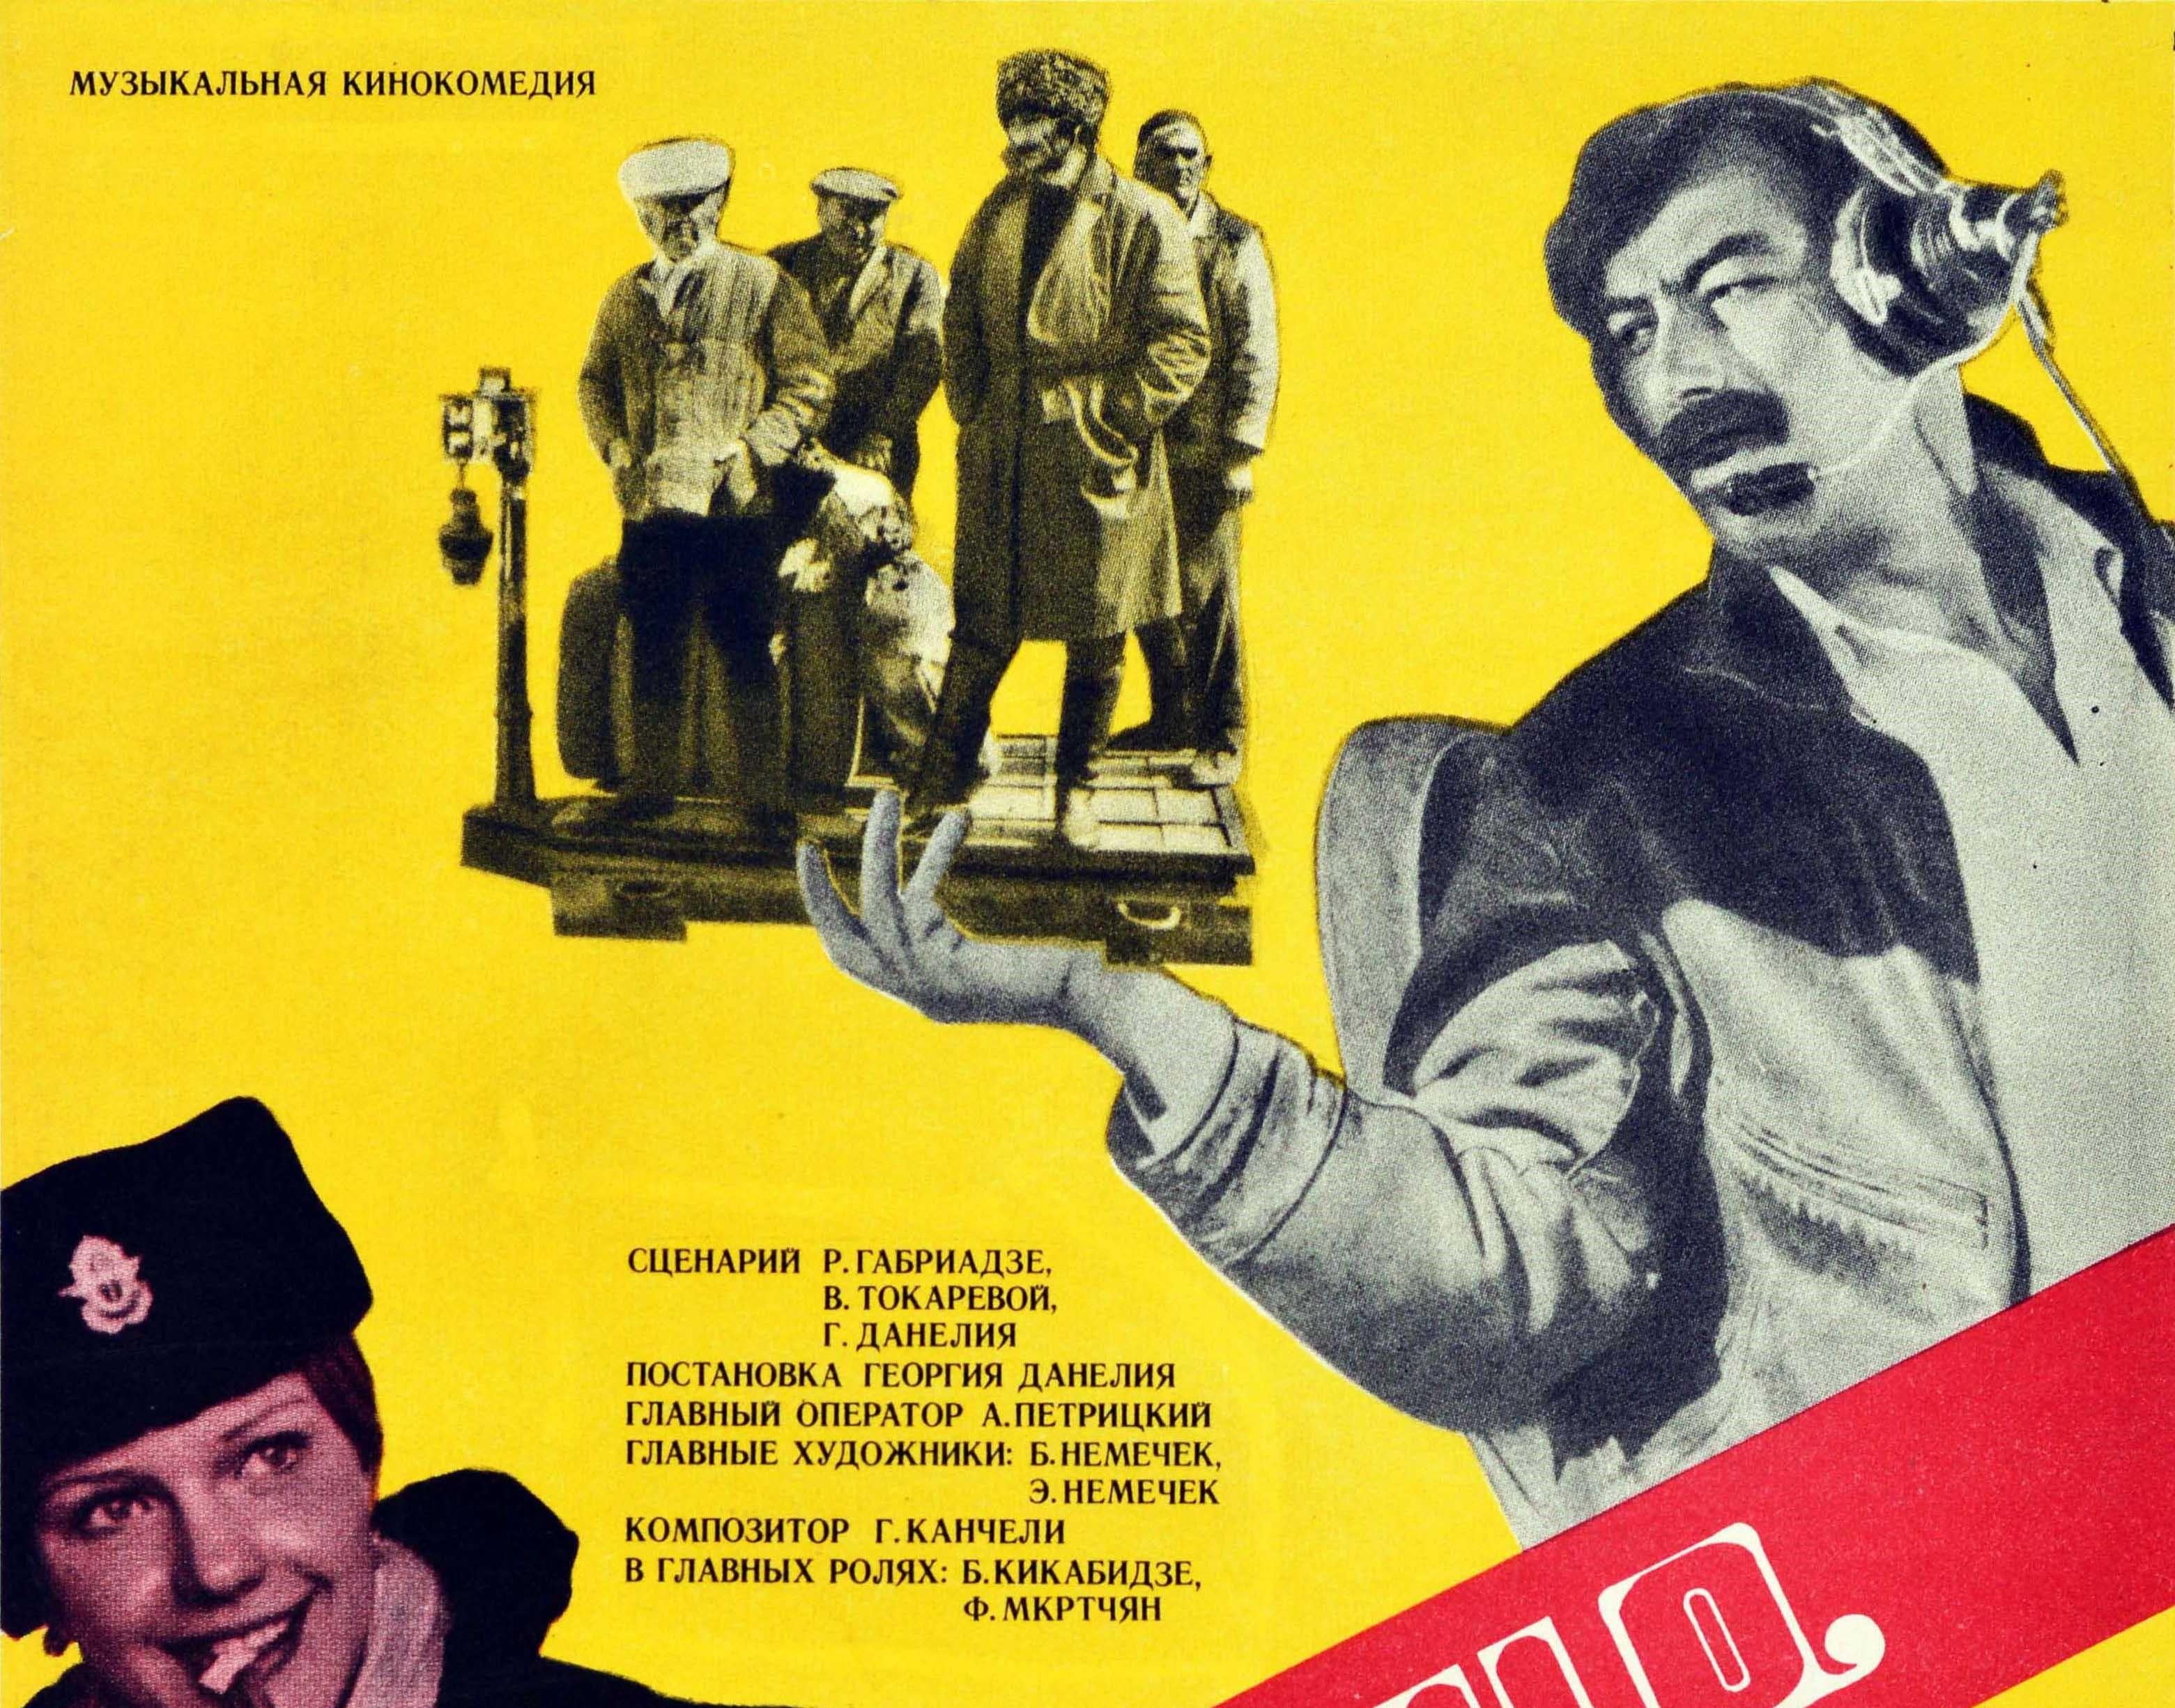 Original vintage Soviet movie poster for a classic award winning comedy film that won the 1977 Golden Prize at the 10th Moscow International Film Festival - Mimino - directed by Georgiy Daneliya with director of photography Anatoliy Petritskiy, and